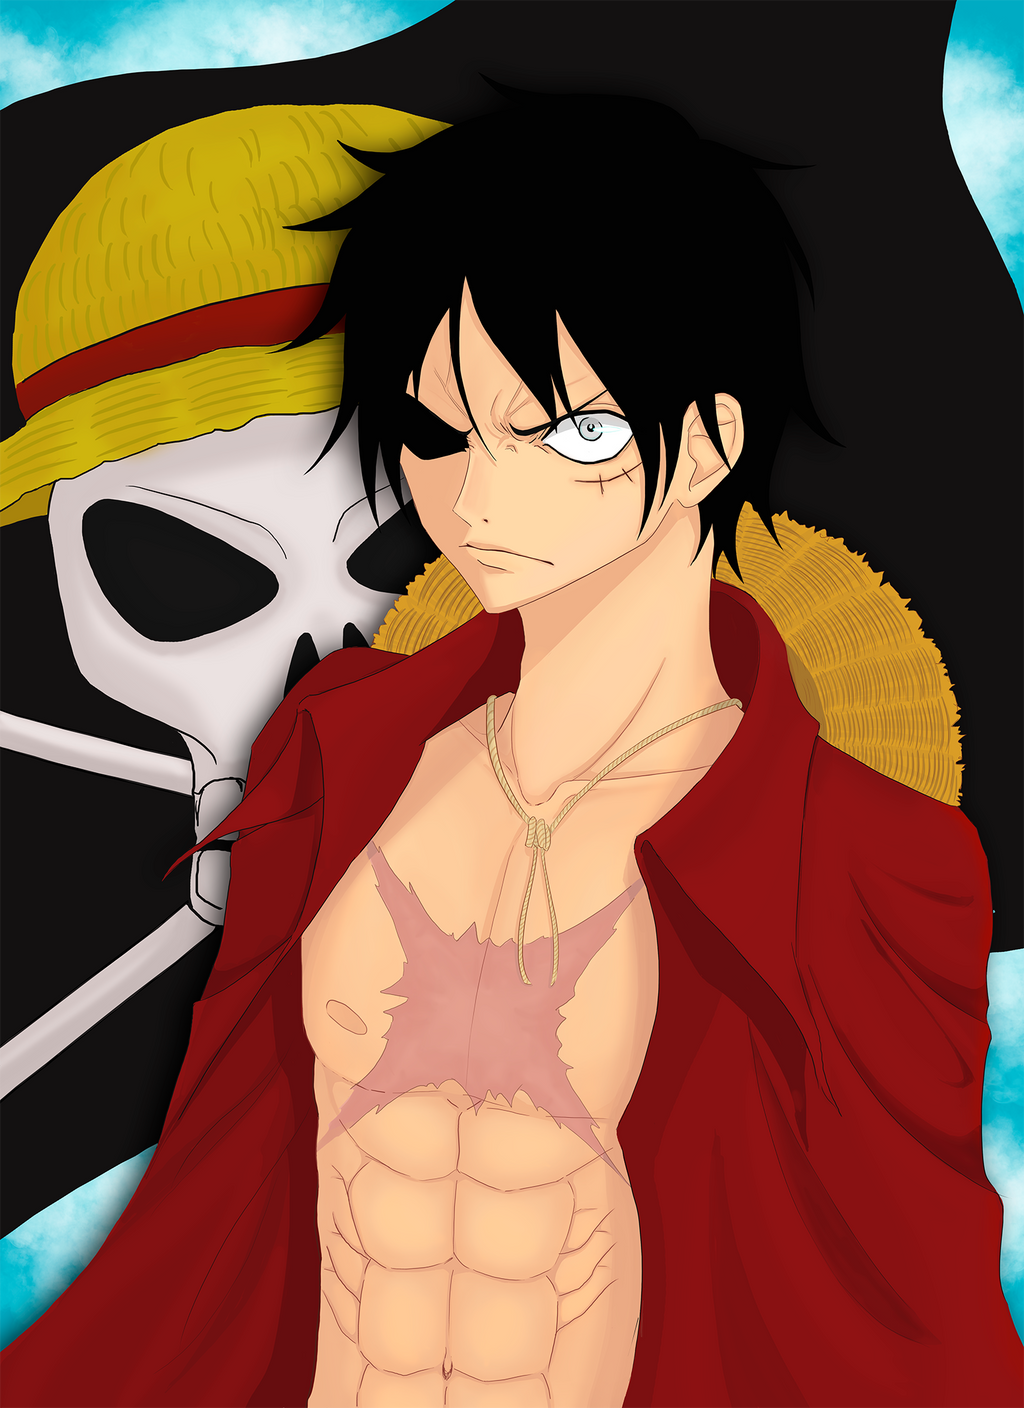 Monkey D Luffy. The King of pirates